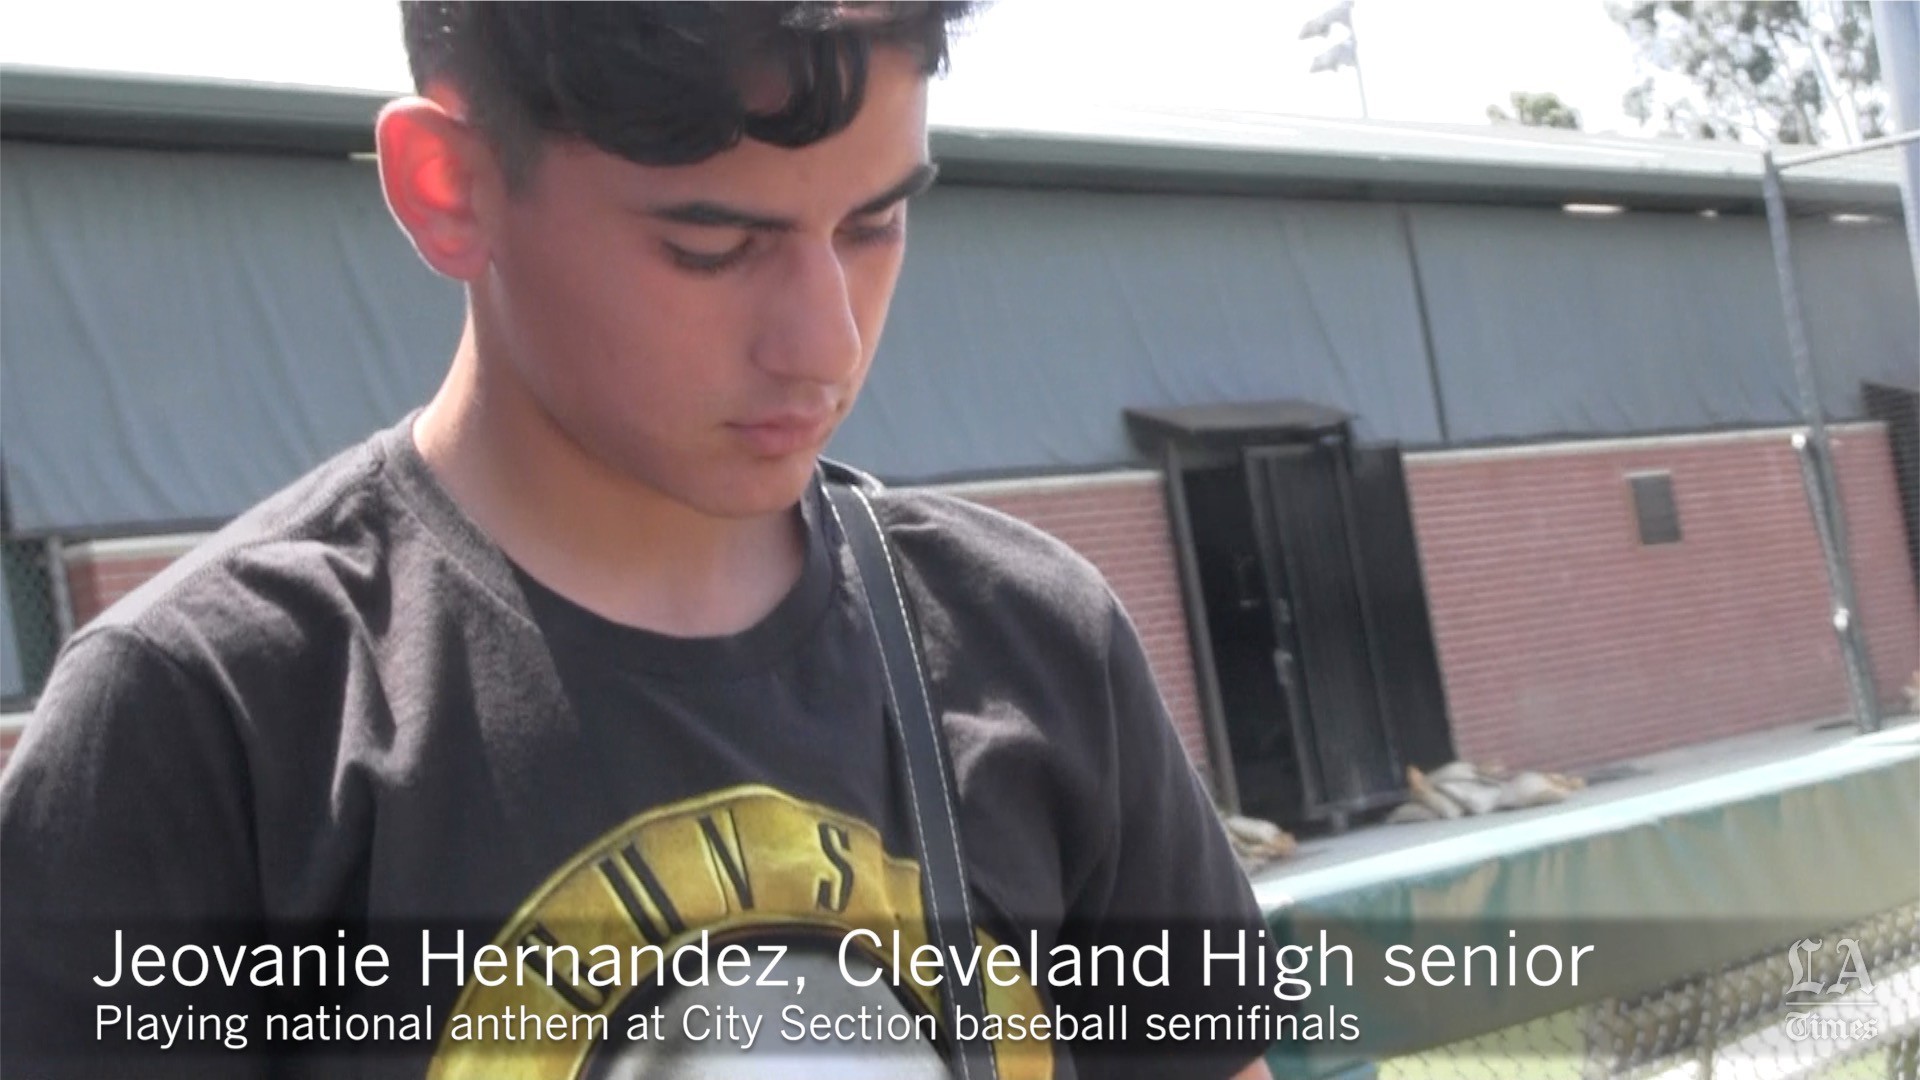 Jeovanie Hernandez of Cleveland shows how to play national anthem on electric guitar ...1920 x 1080